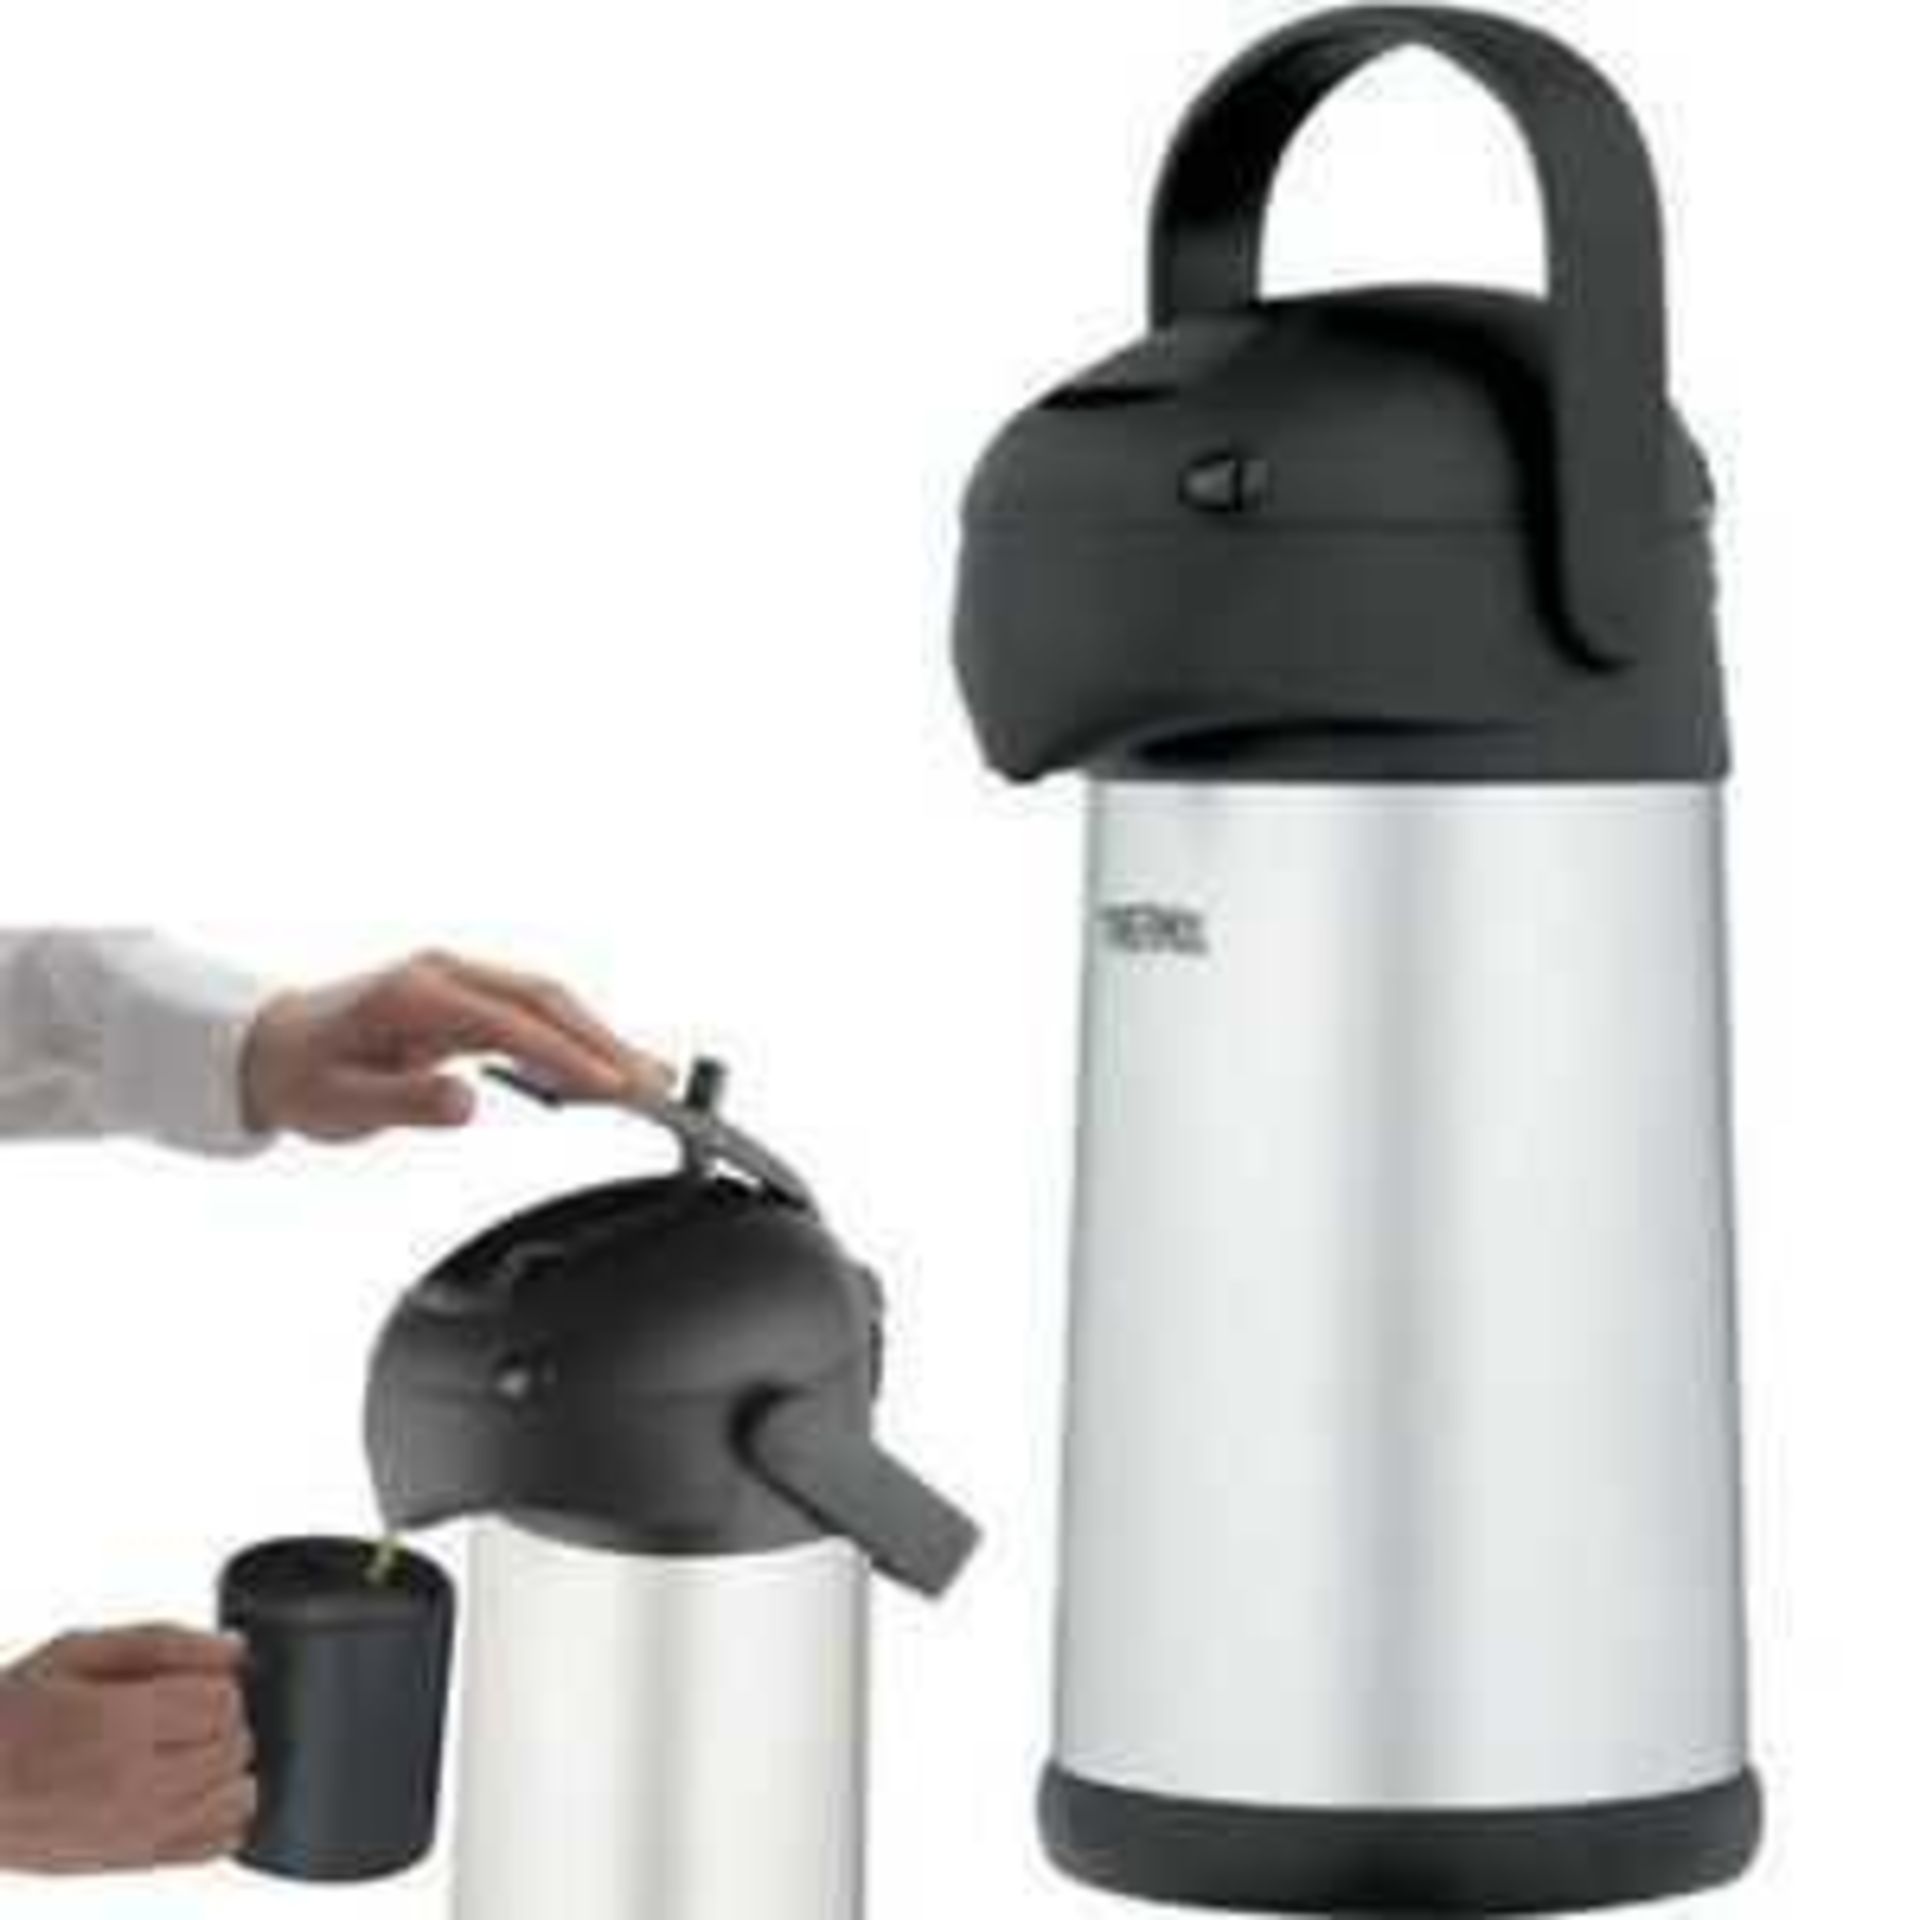 Rrp £30 To £50 Each Assorted Kitchen Items To Include Firmus 2.5 L Vacuum Insulated Pump Pot And Col